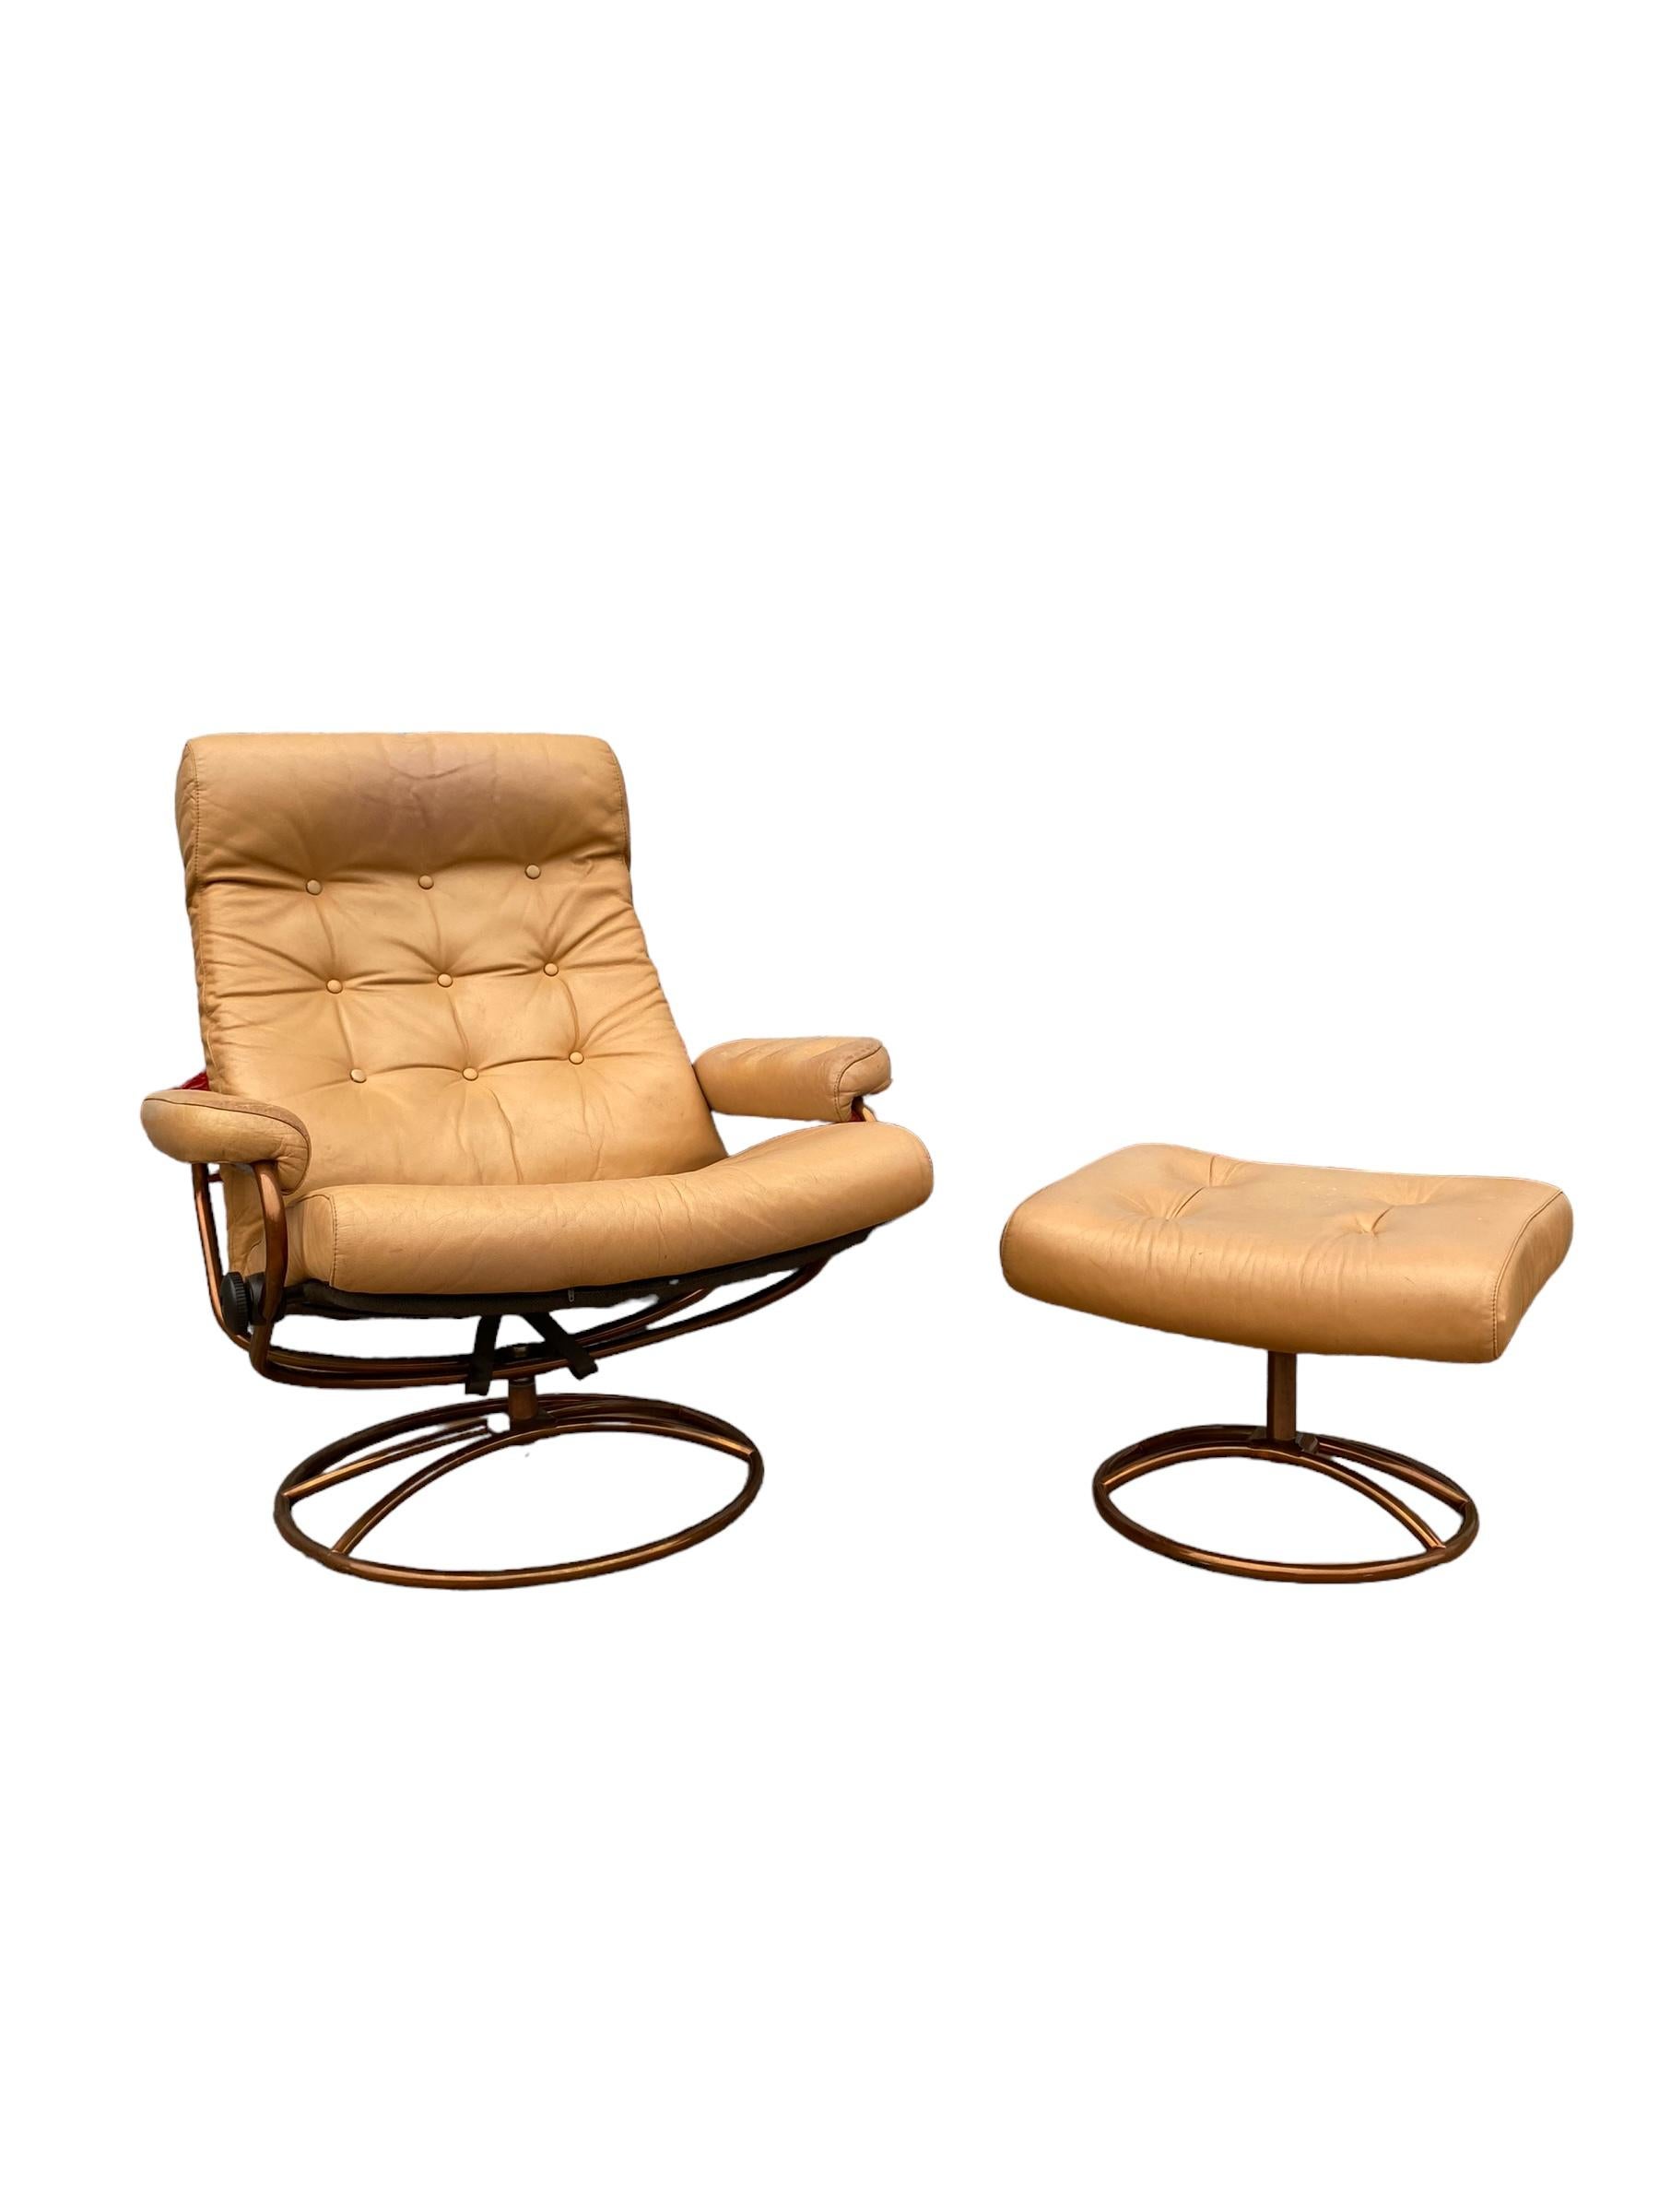 Leather Ekornes Stressless Reclining Lounge Chair and Ottoman in Cream with Copper Frame